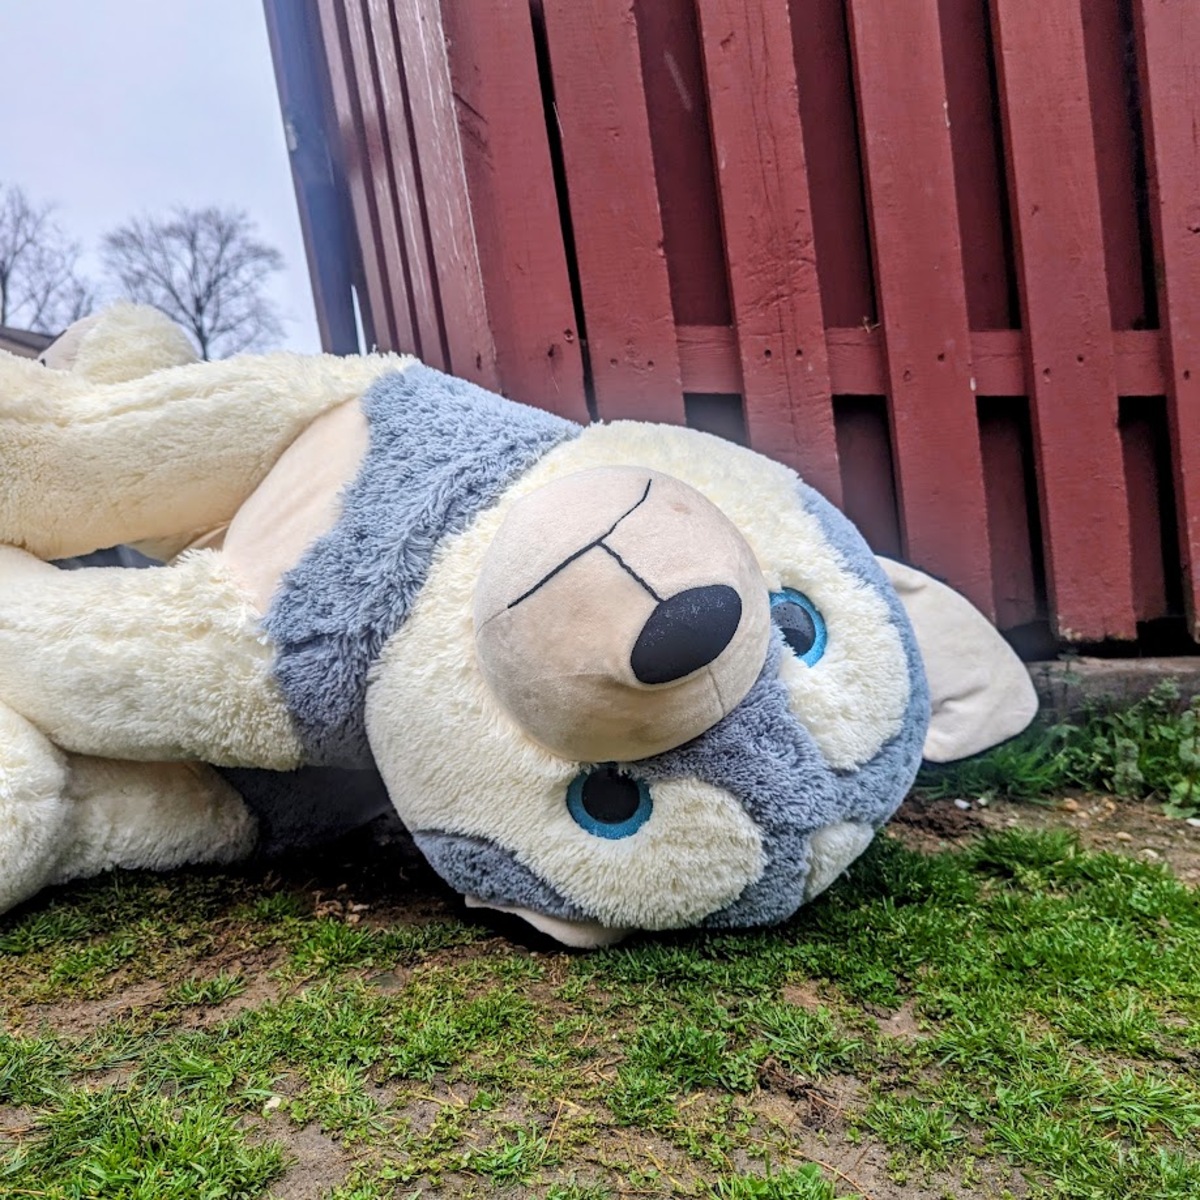 An oversized stuffed alaskan husky laying next to a trash can in the grass.